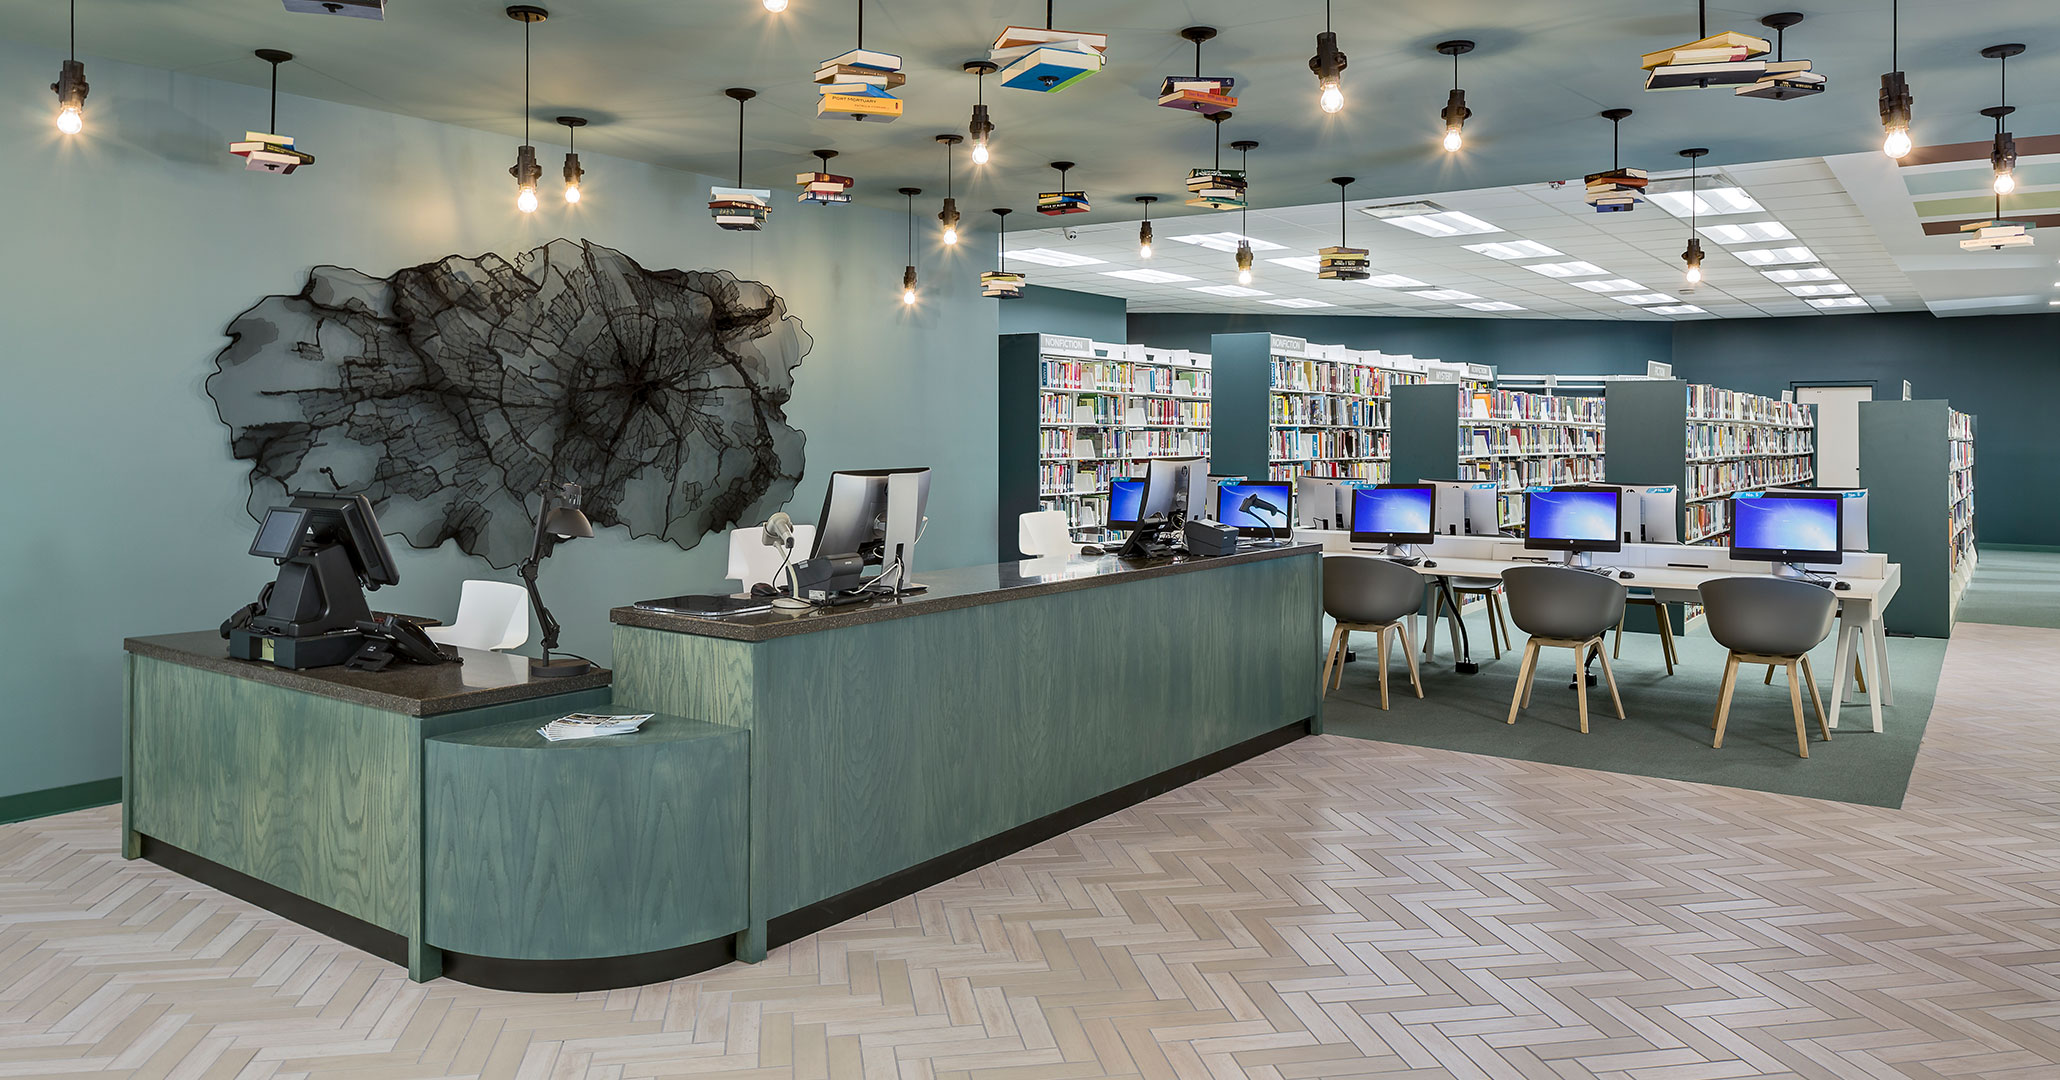 Richland County Library worked with Boudreaux architects to design impactful entryways.